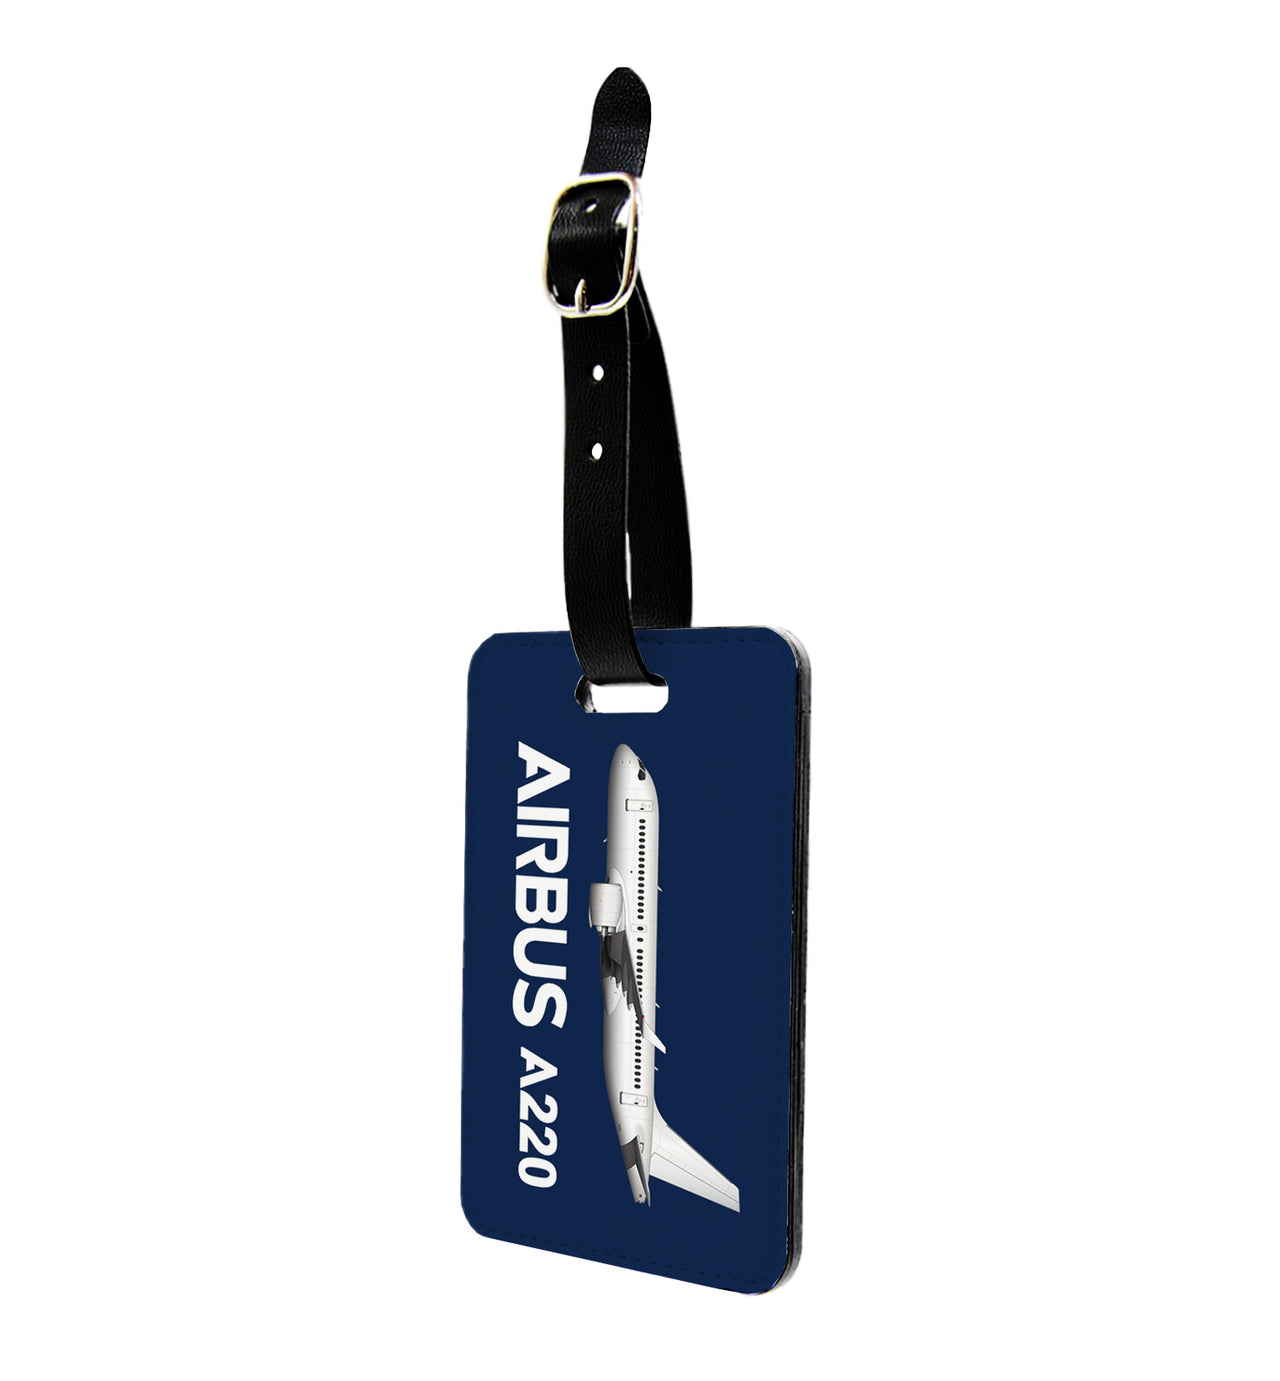 The Airbus A220 Designed Luggage Tag